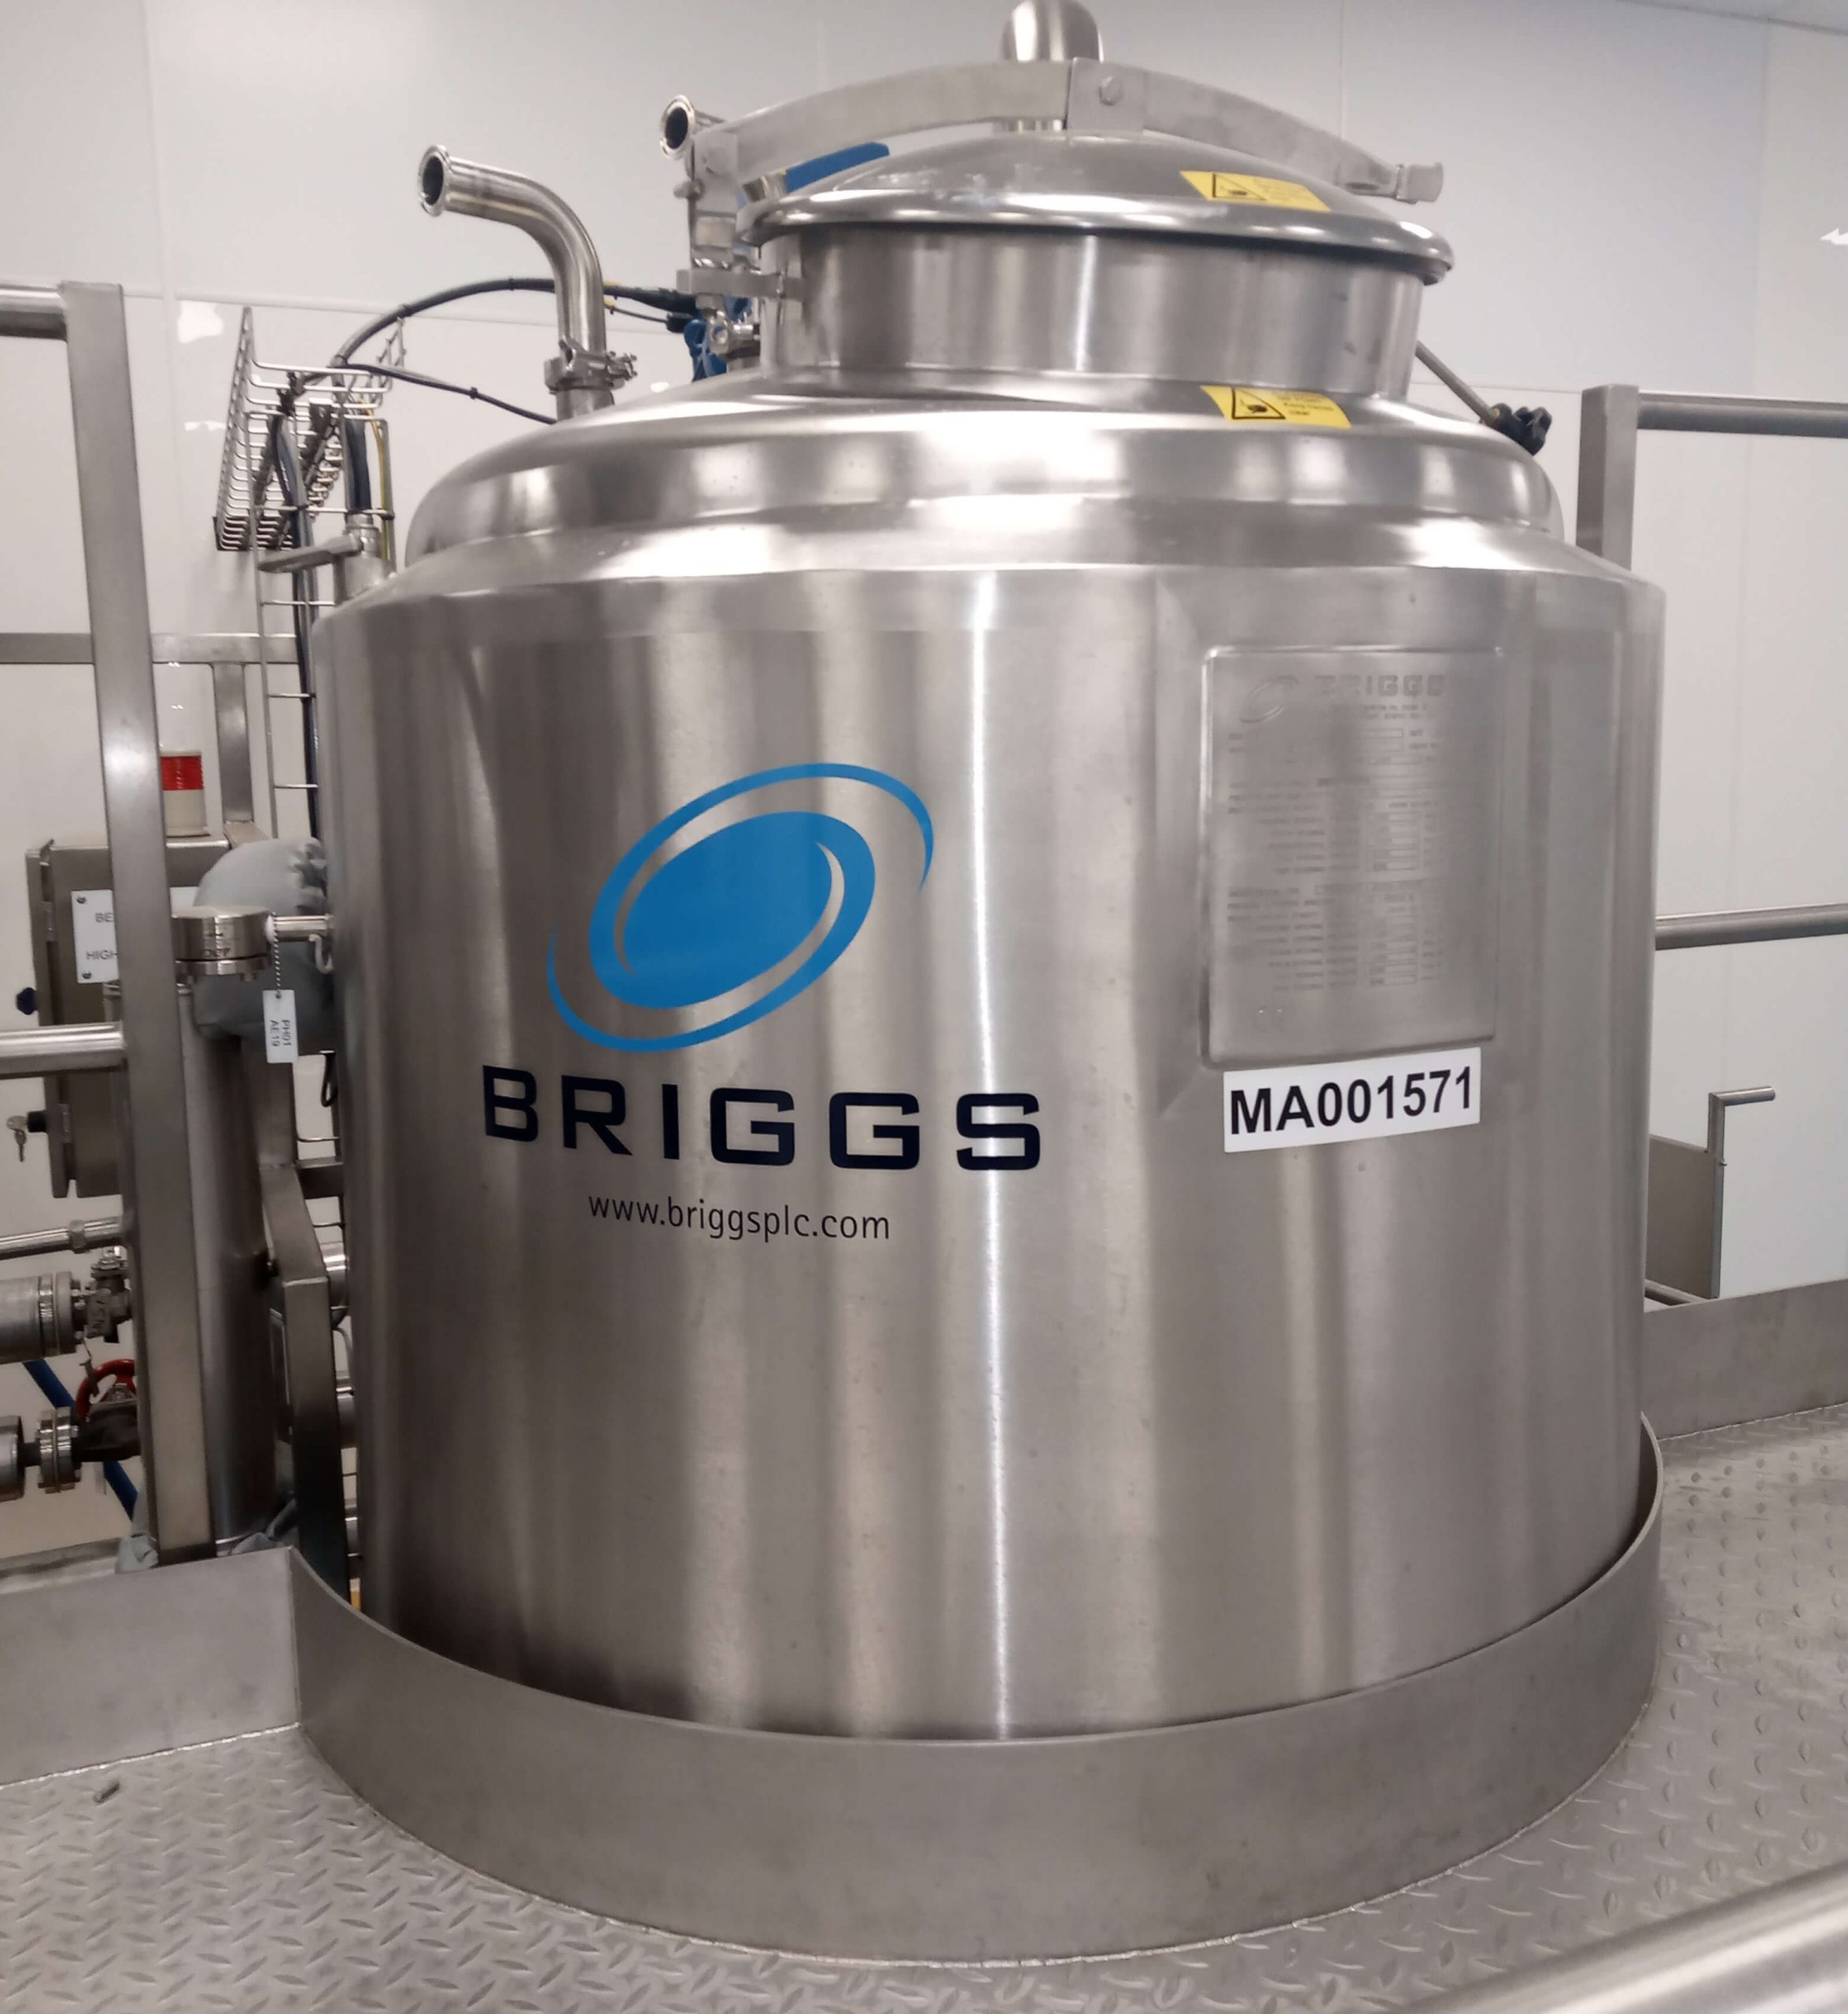 Process design of pharmaceutical mixing systems.